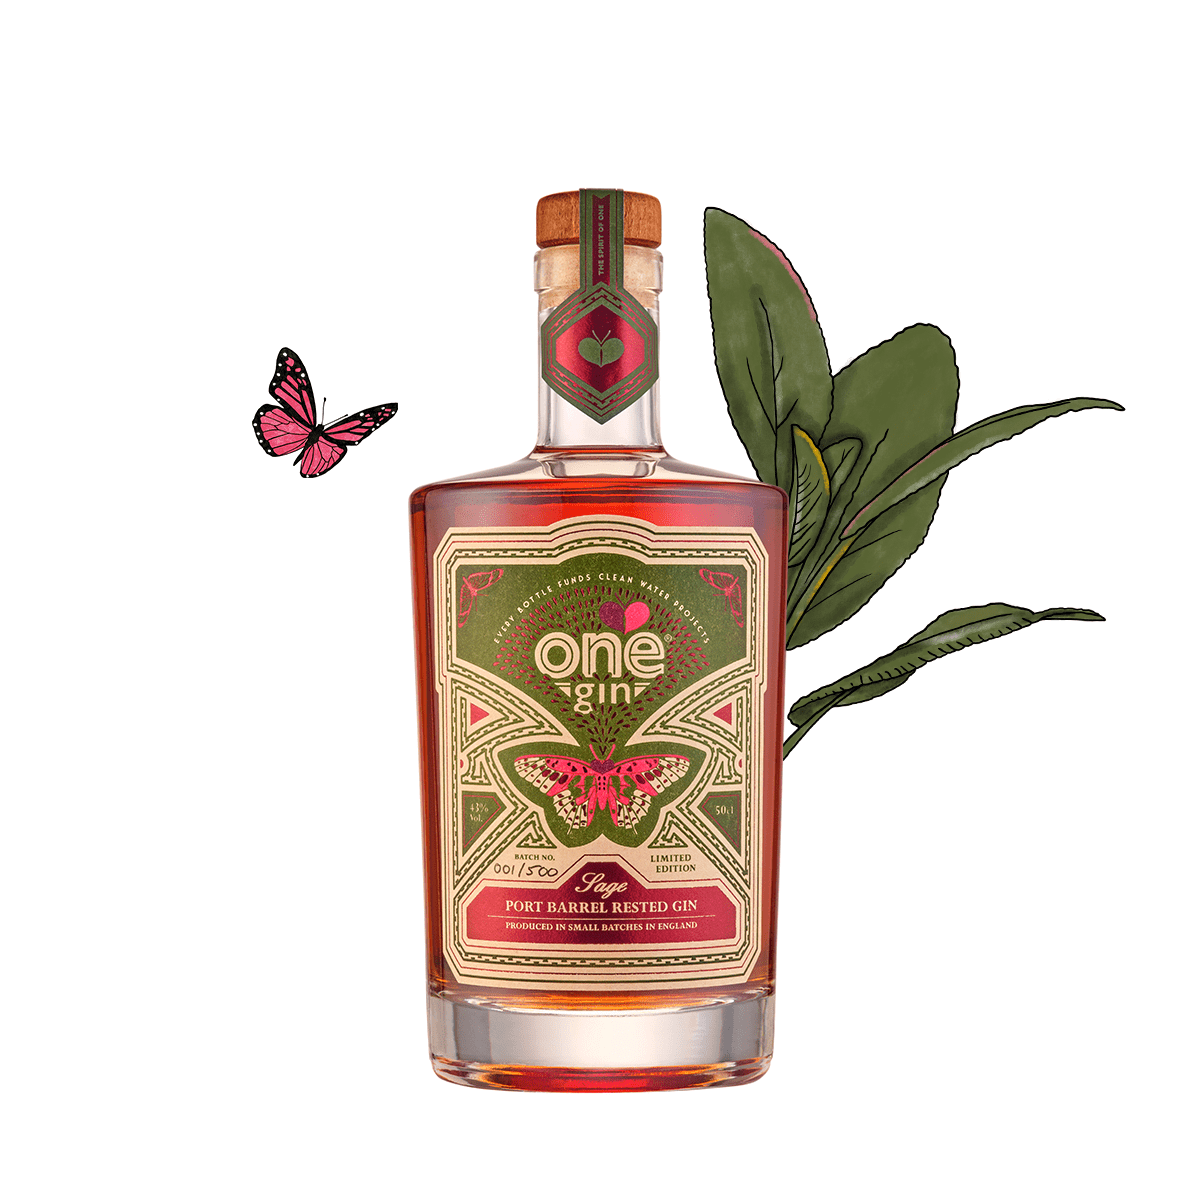 One Port Barrel Rested Gin Limited Edition